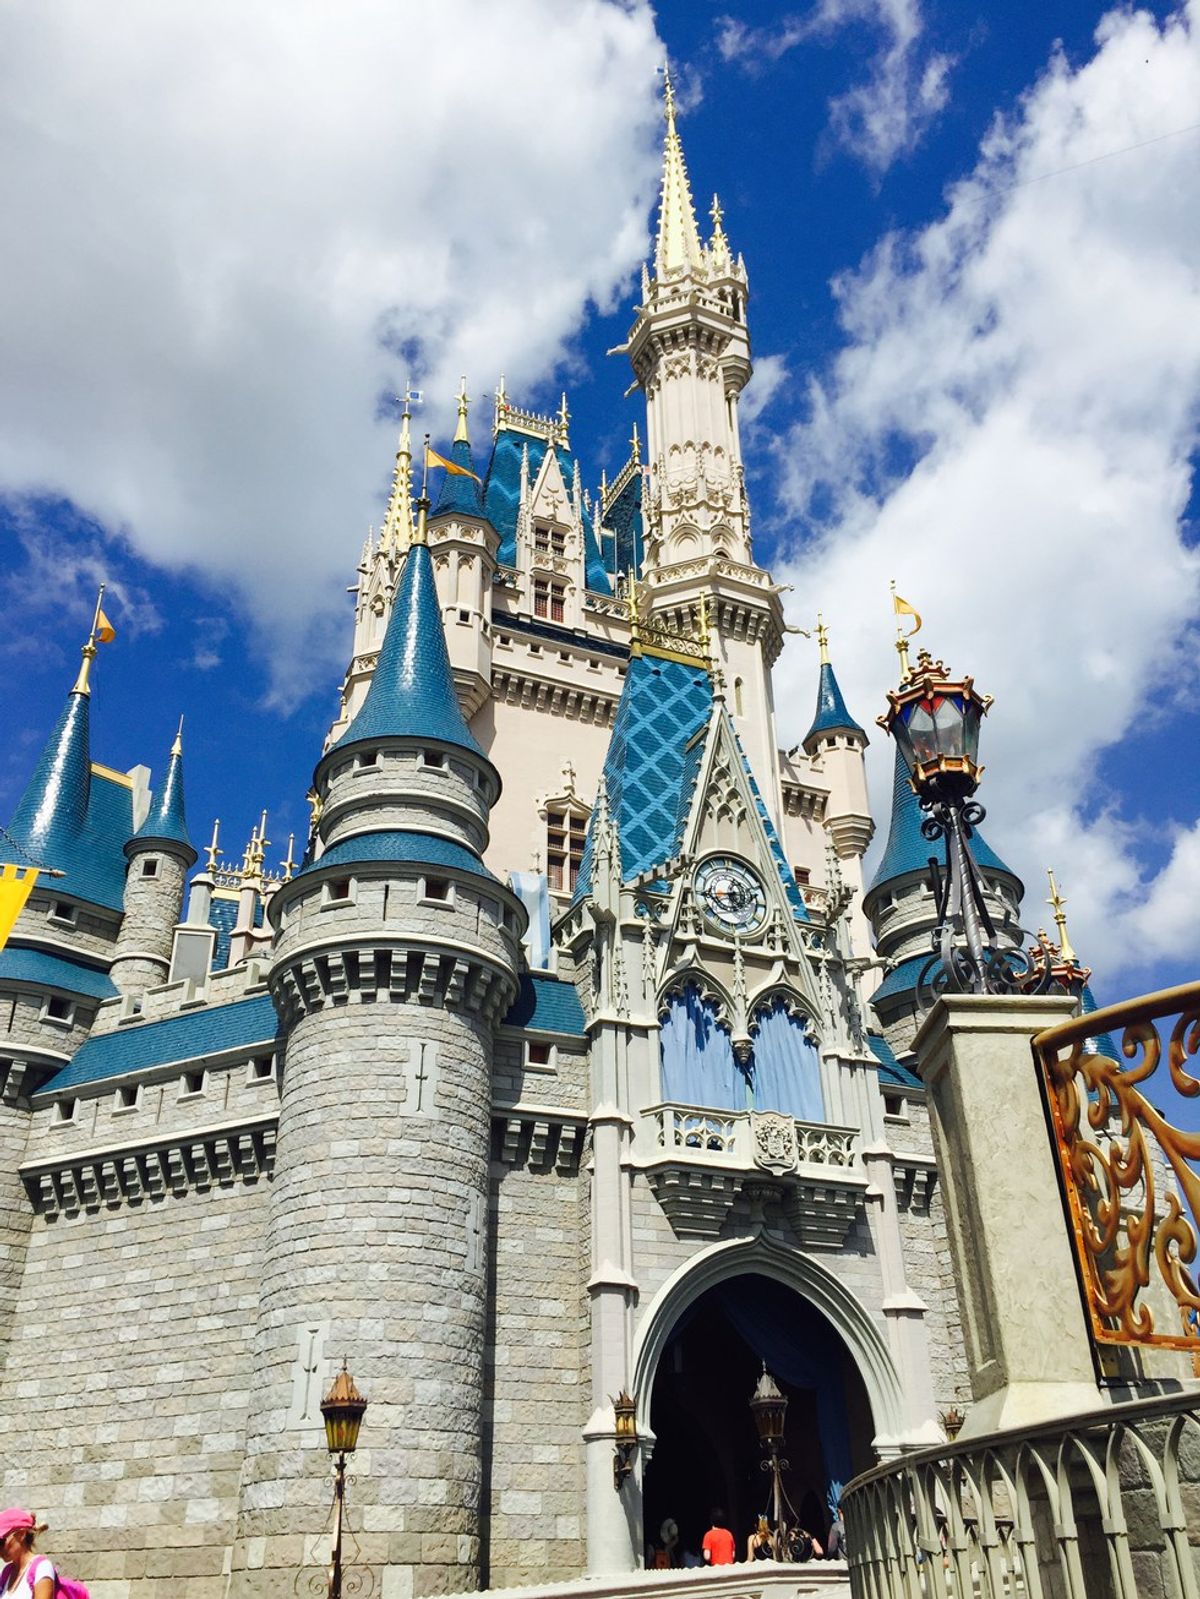 6 Classic Disney Rides That Are Here To Stay